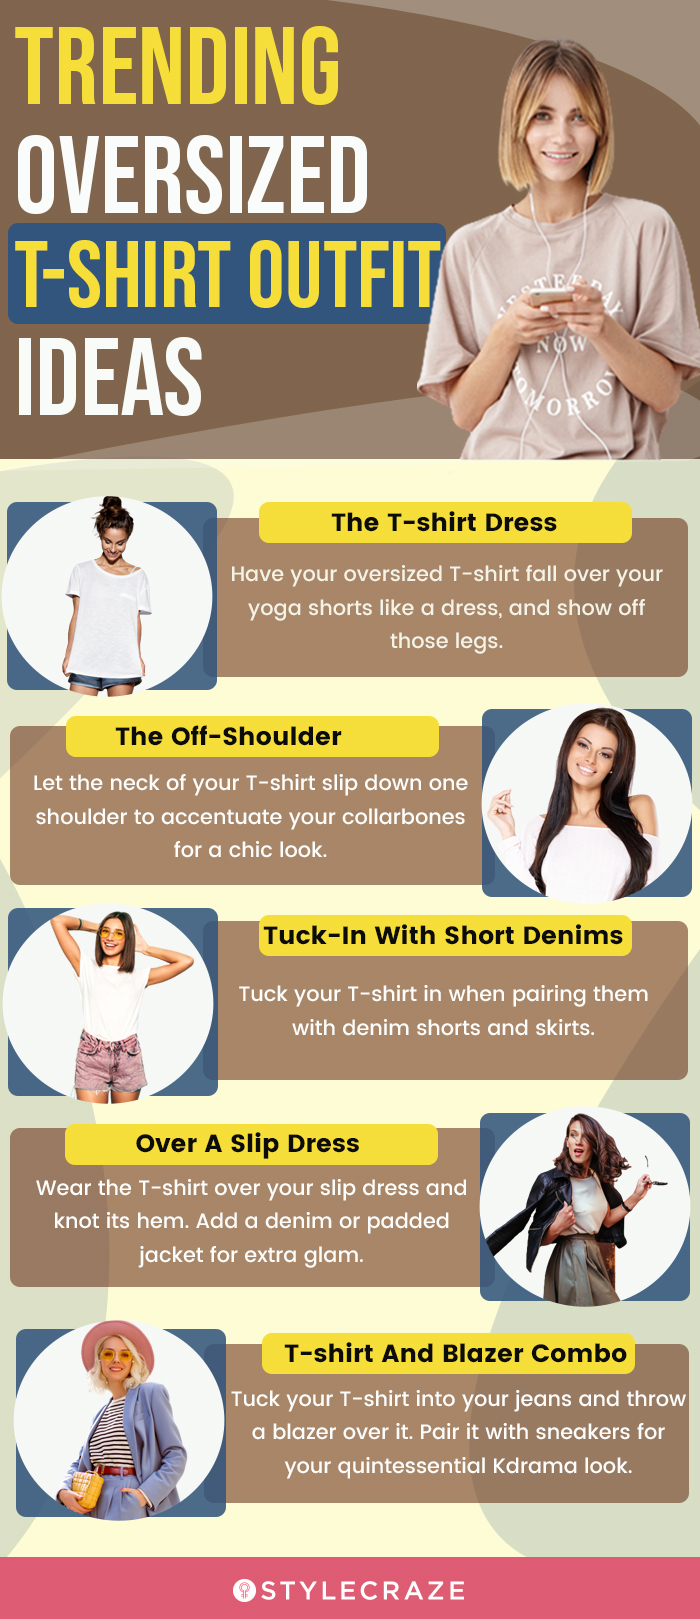 trending oversized t shirt outfit ideas [infographic]